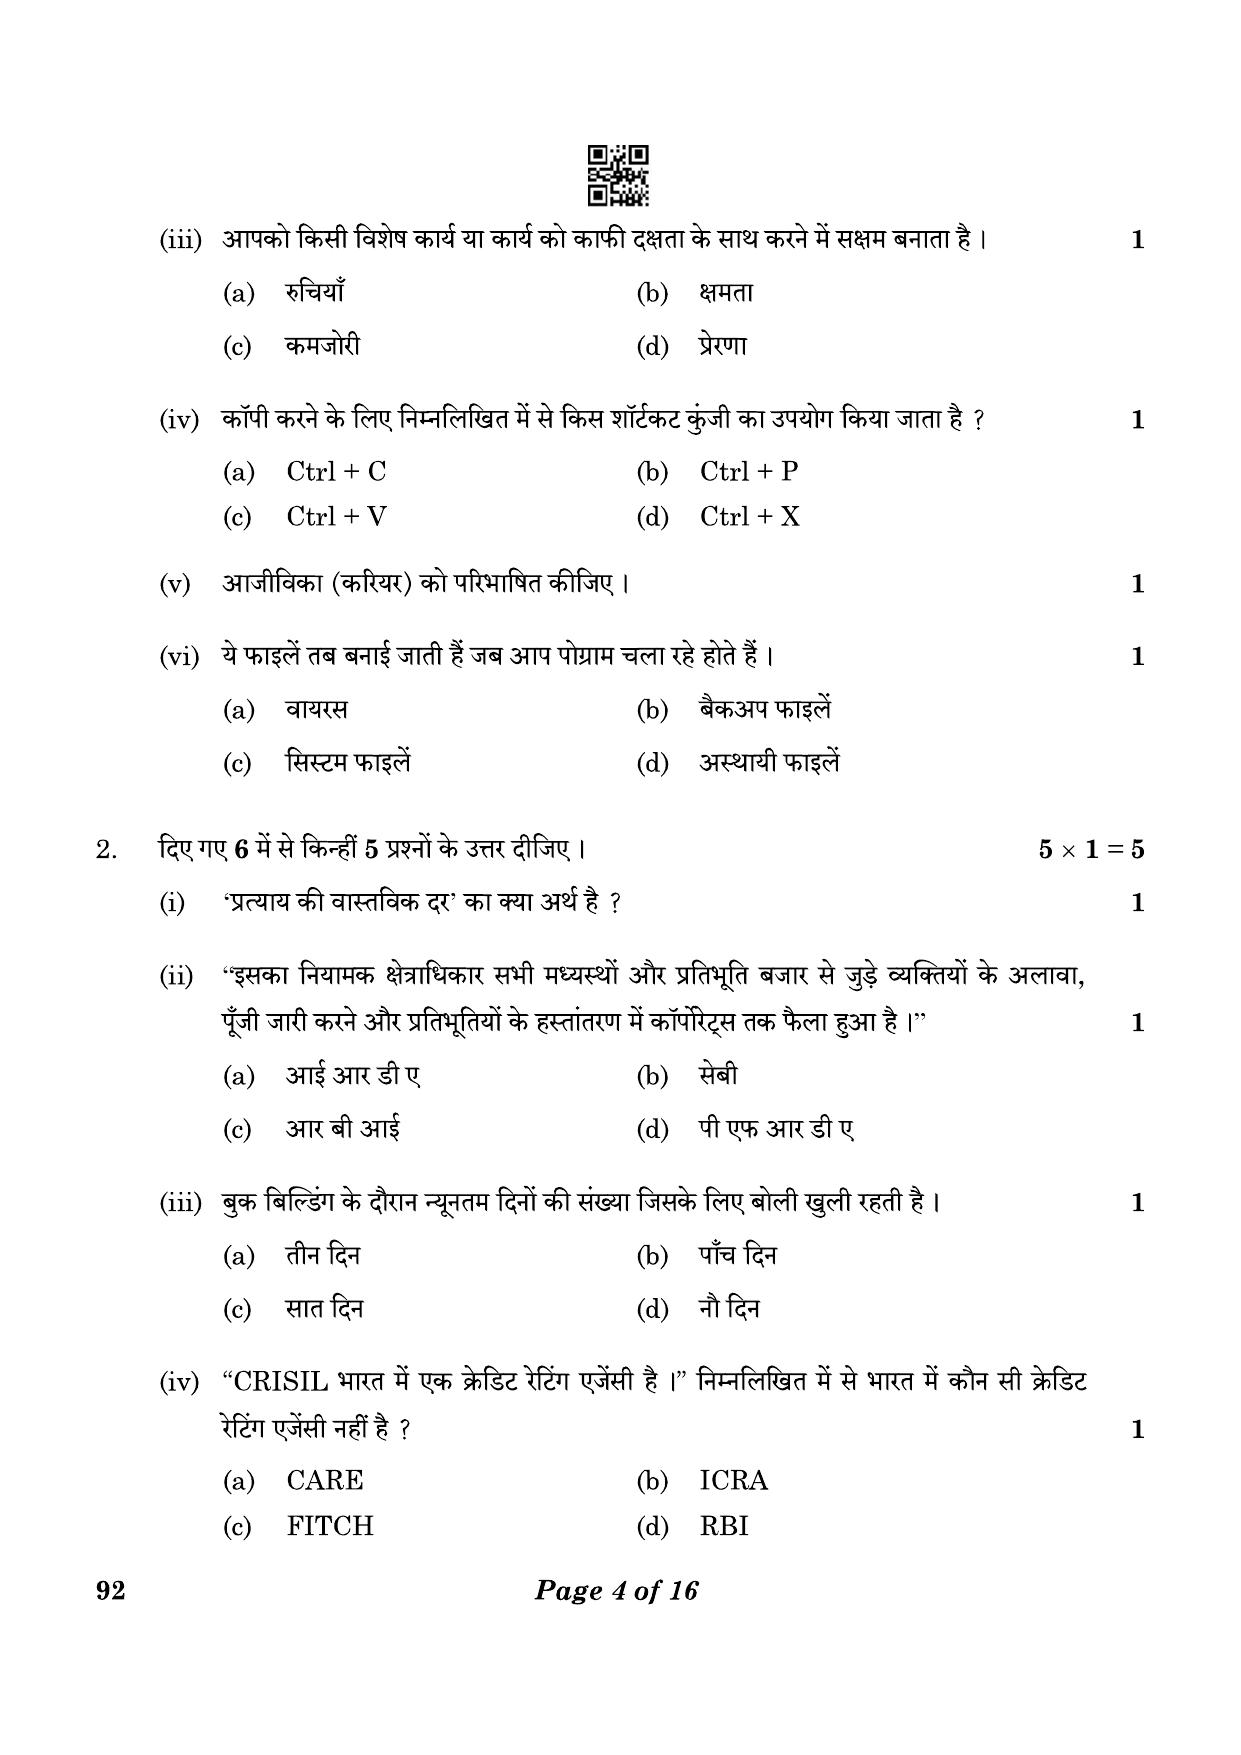 CBSE Class 10 92 Introduction To Financial Markets 2023 Question Paper - Page 4